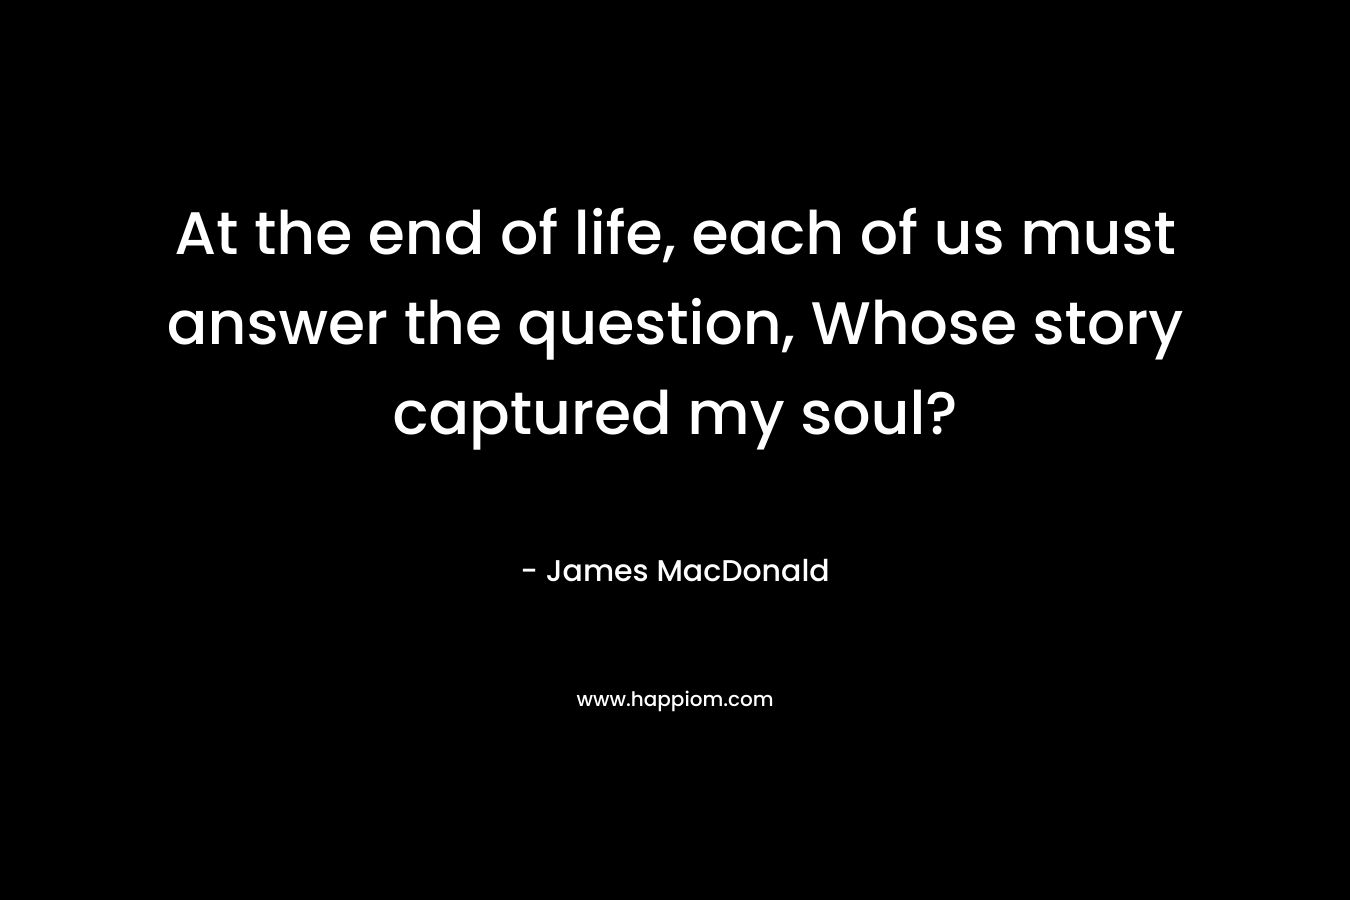 At the end of life, each of us must answer the question, Whose story captured my soul? – James MacDonald